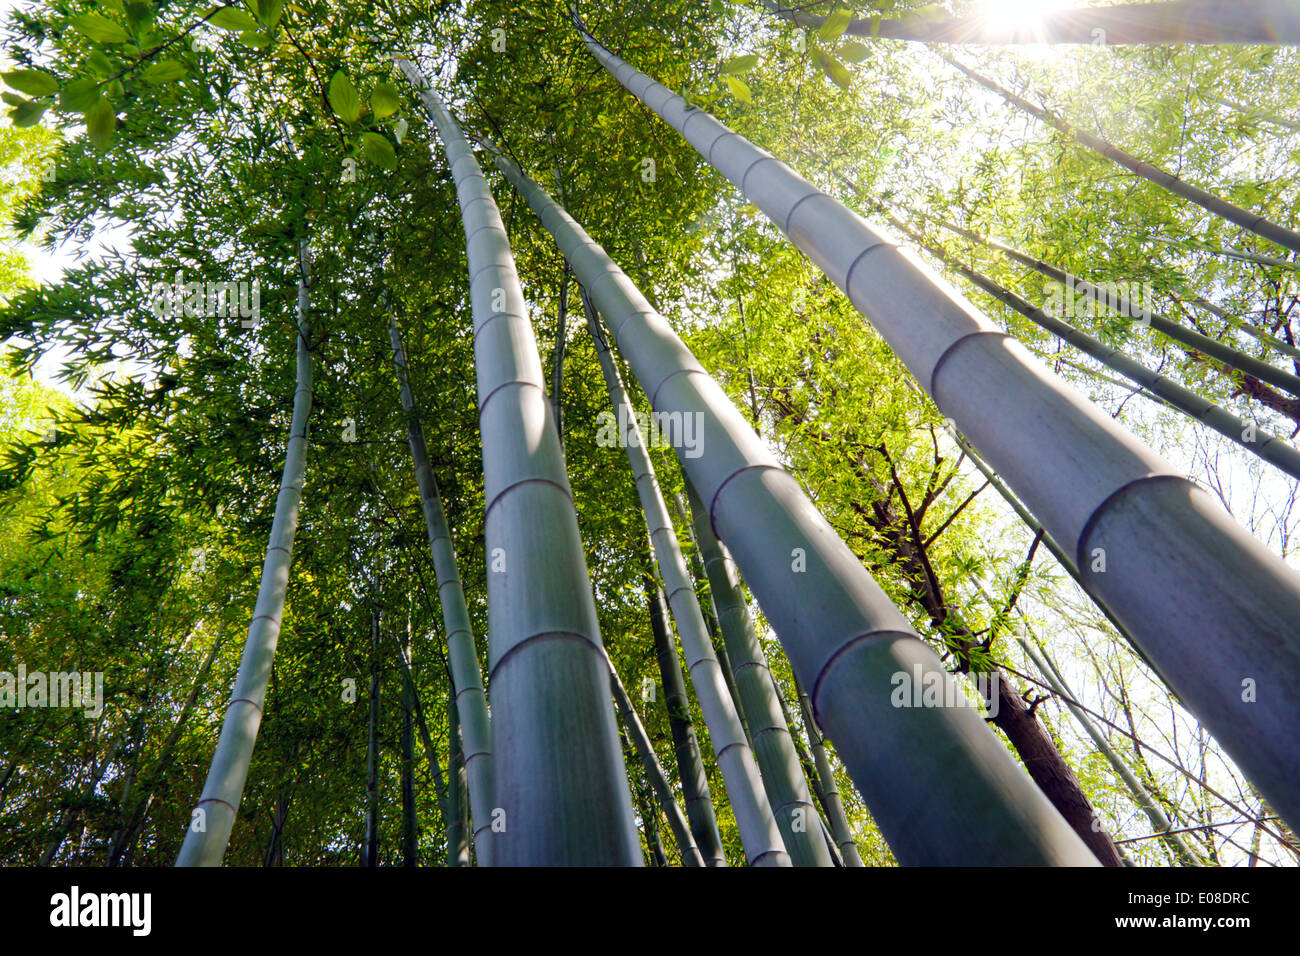 In a sunny bamboo forest Stock Photo